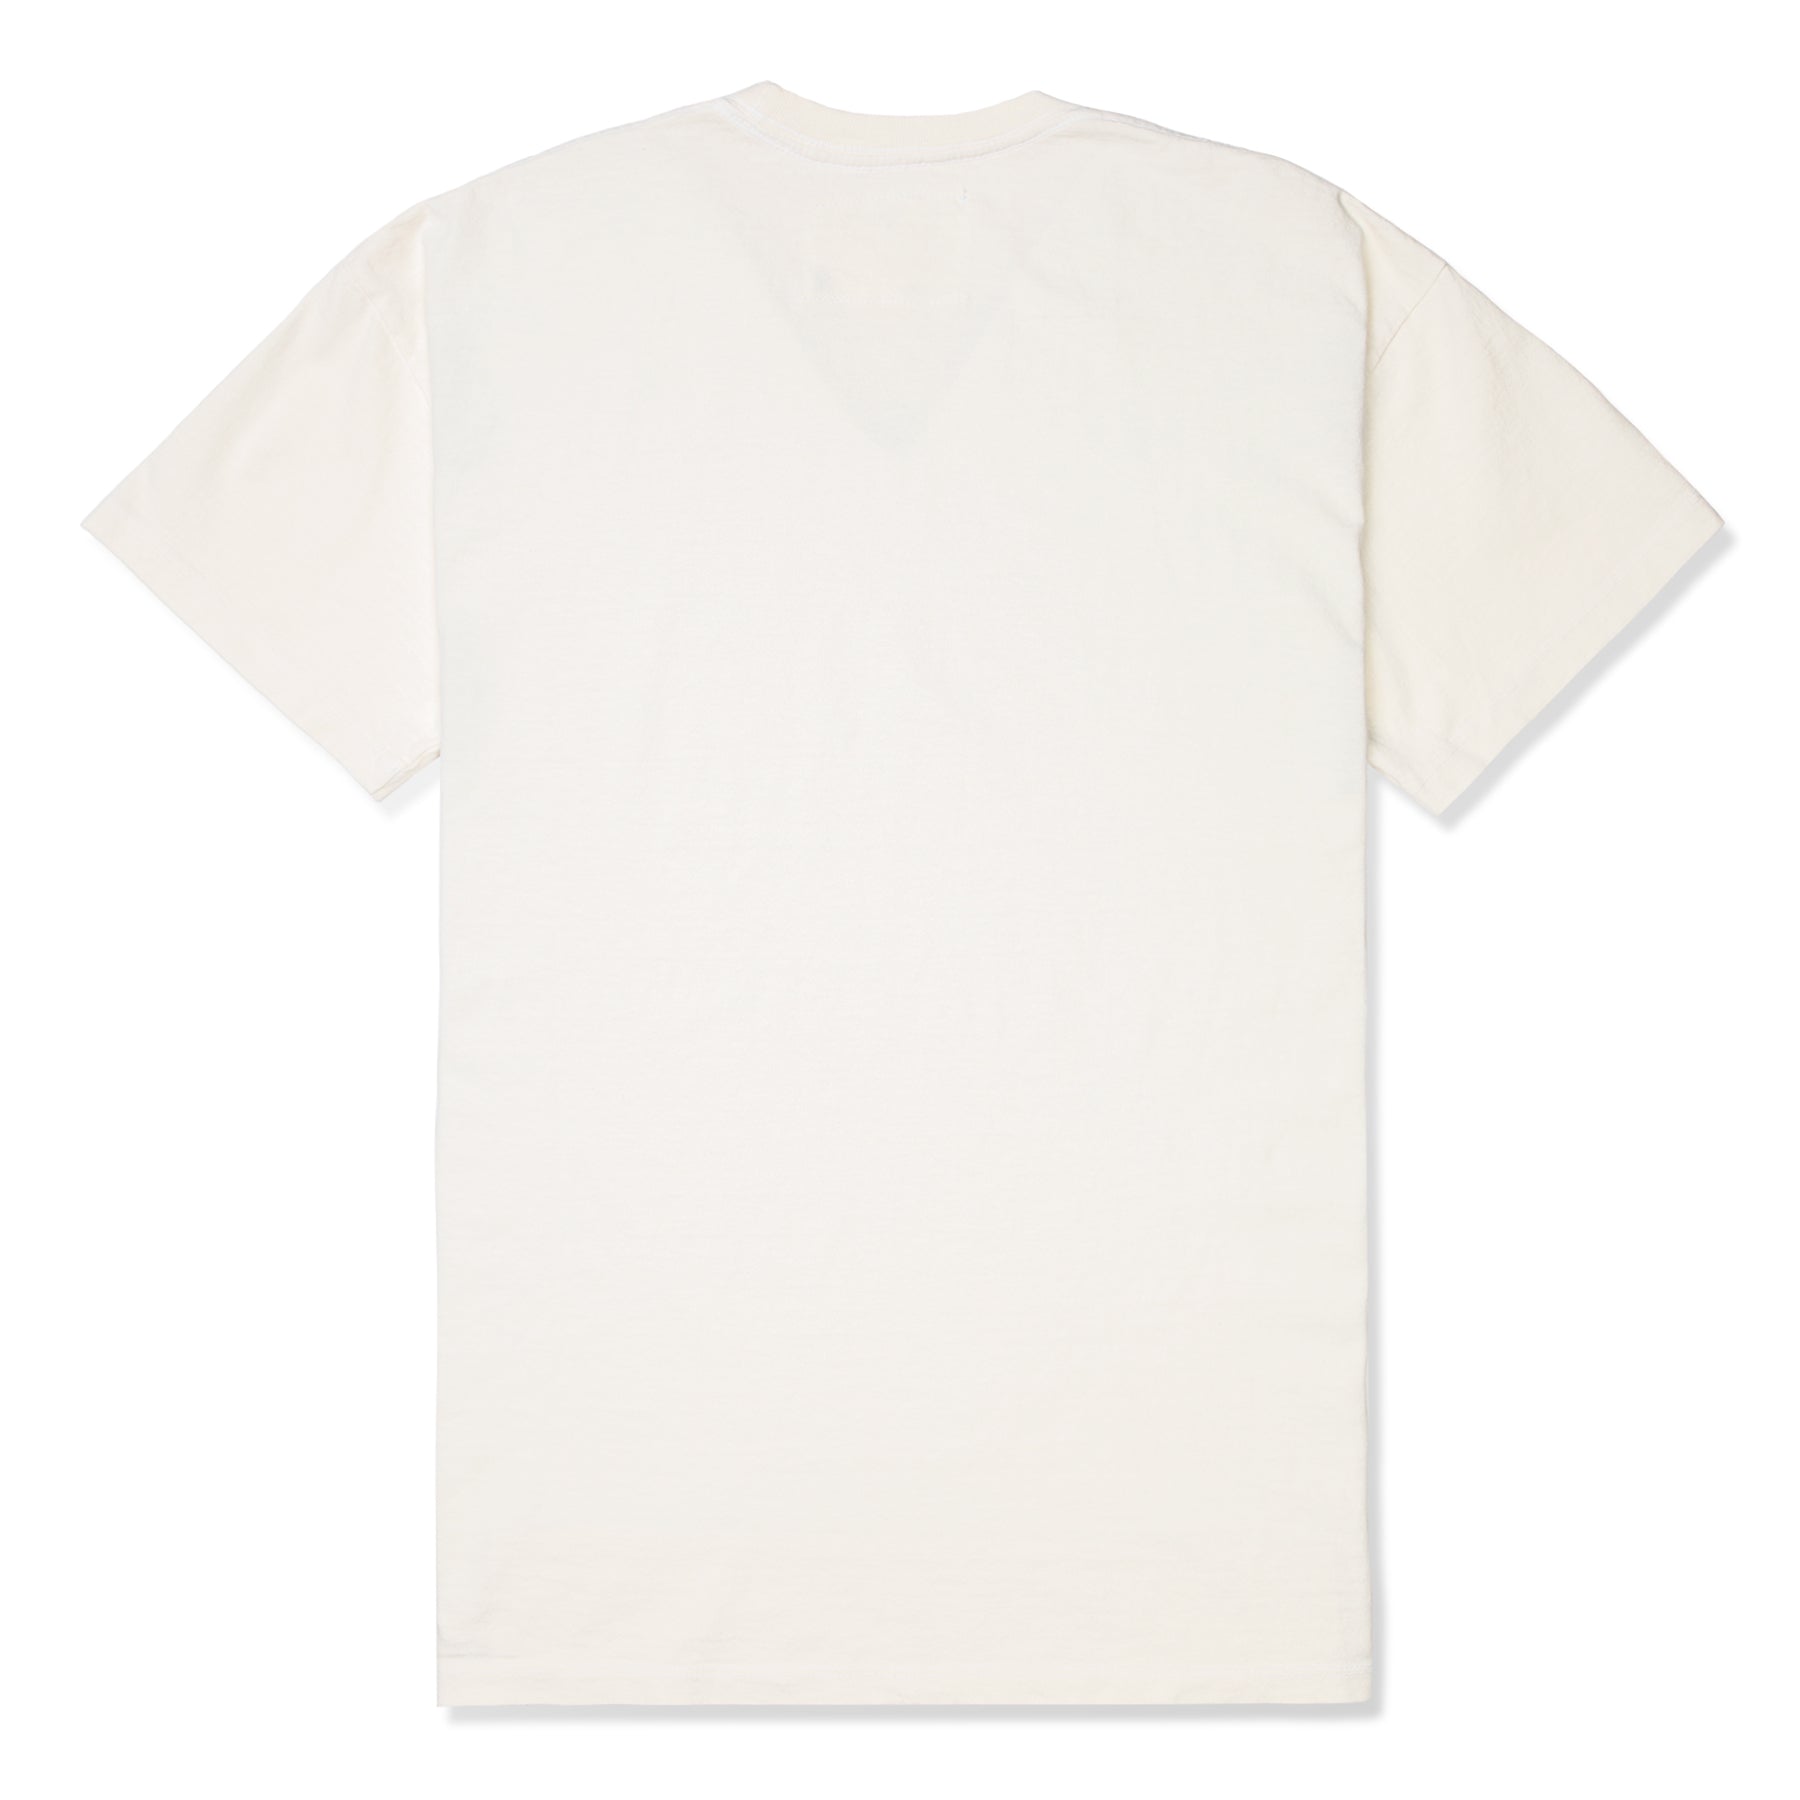 Concepts Trail (Off White) Ends These of T-Shirt One – Days